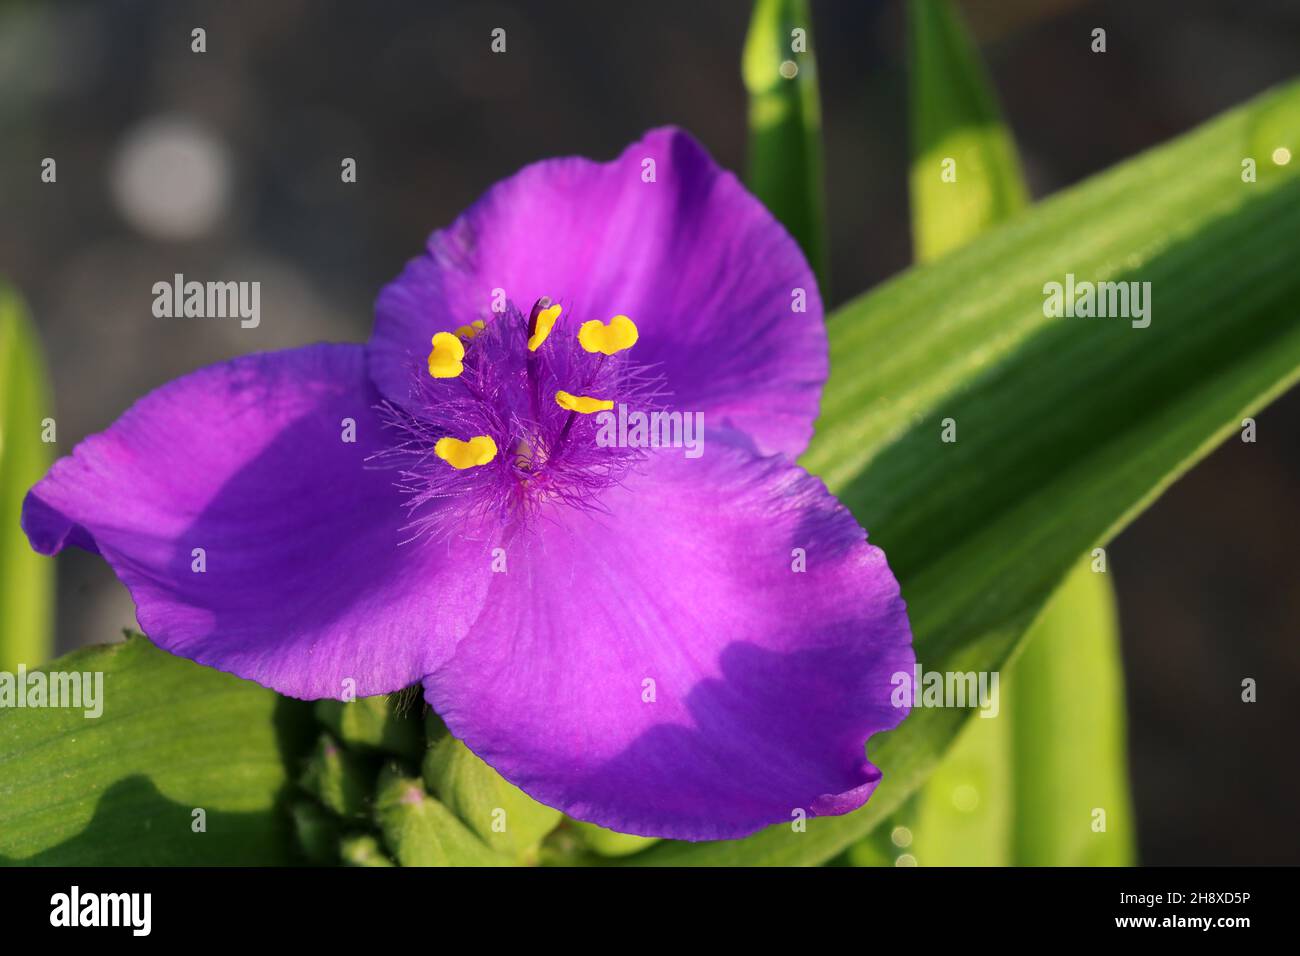 Beautiful blue flowers tradescantia on a blurred background Stock Photo